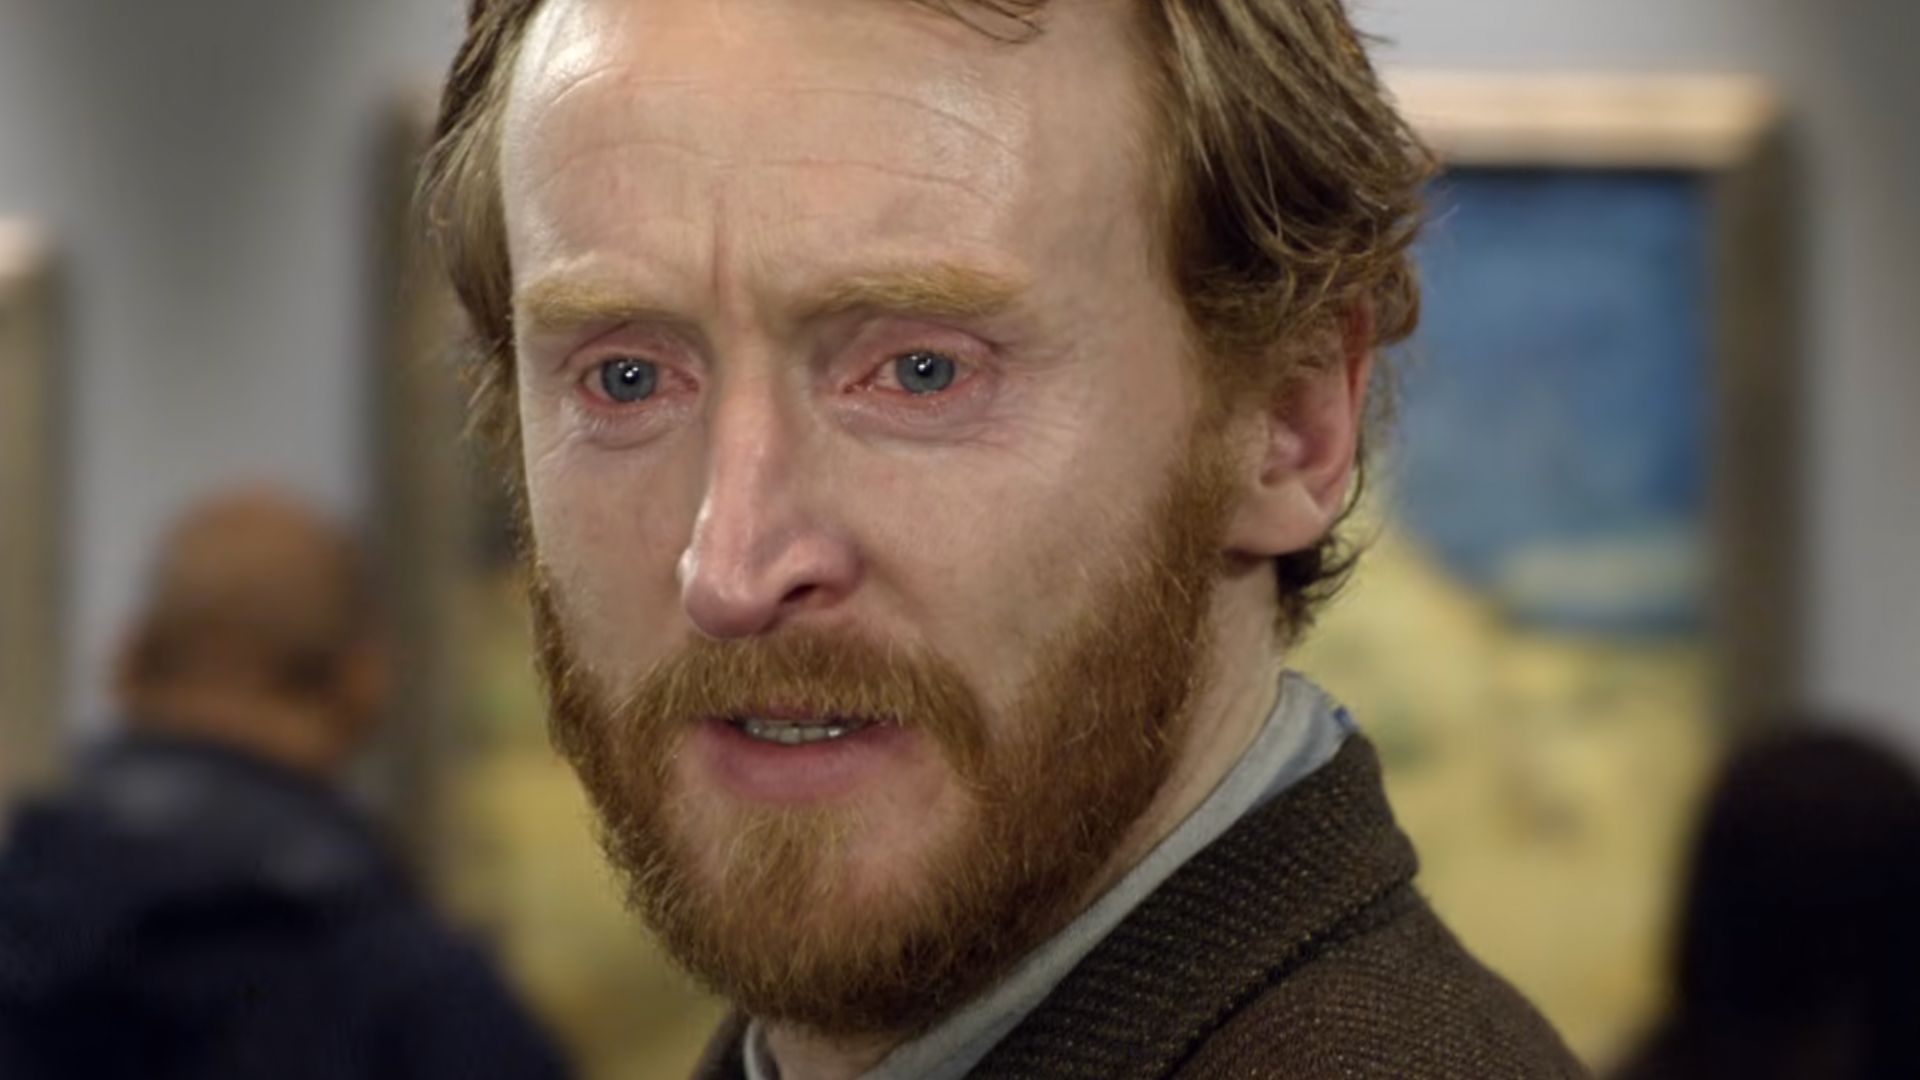 Doctor Who star Tony Curran reveals he has shown daughter ‘powerful’ Van Gogh episode - exclusive